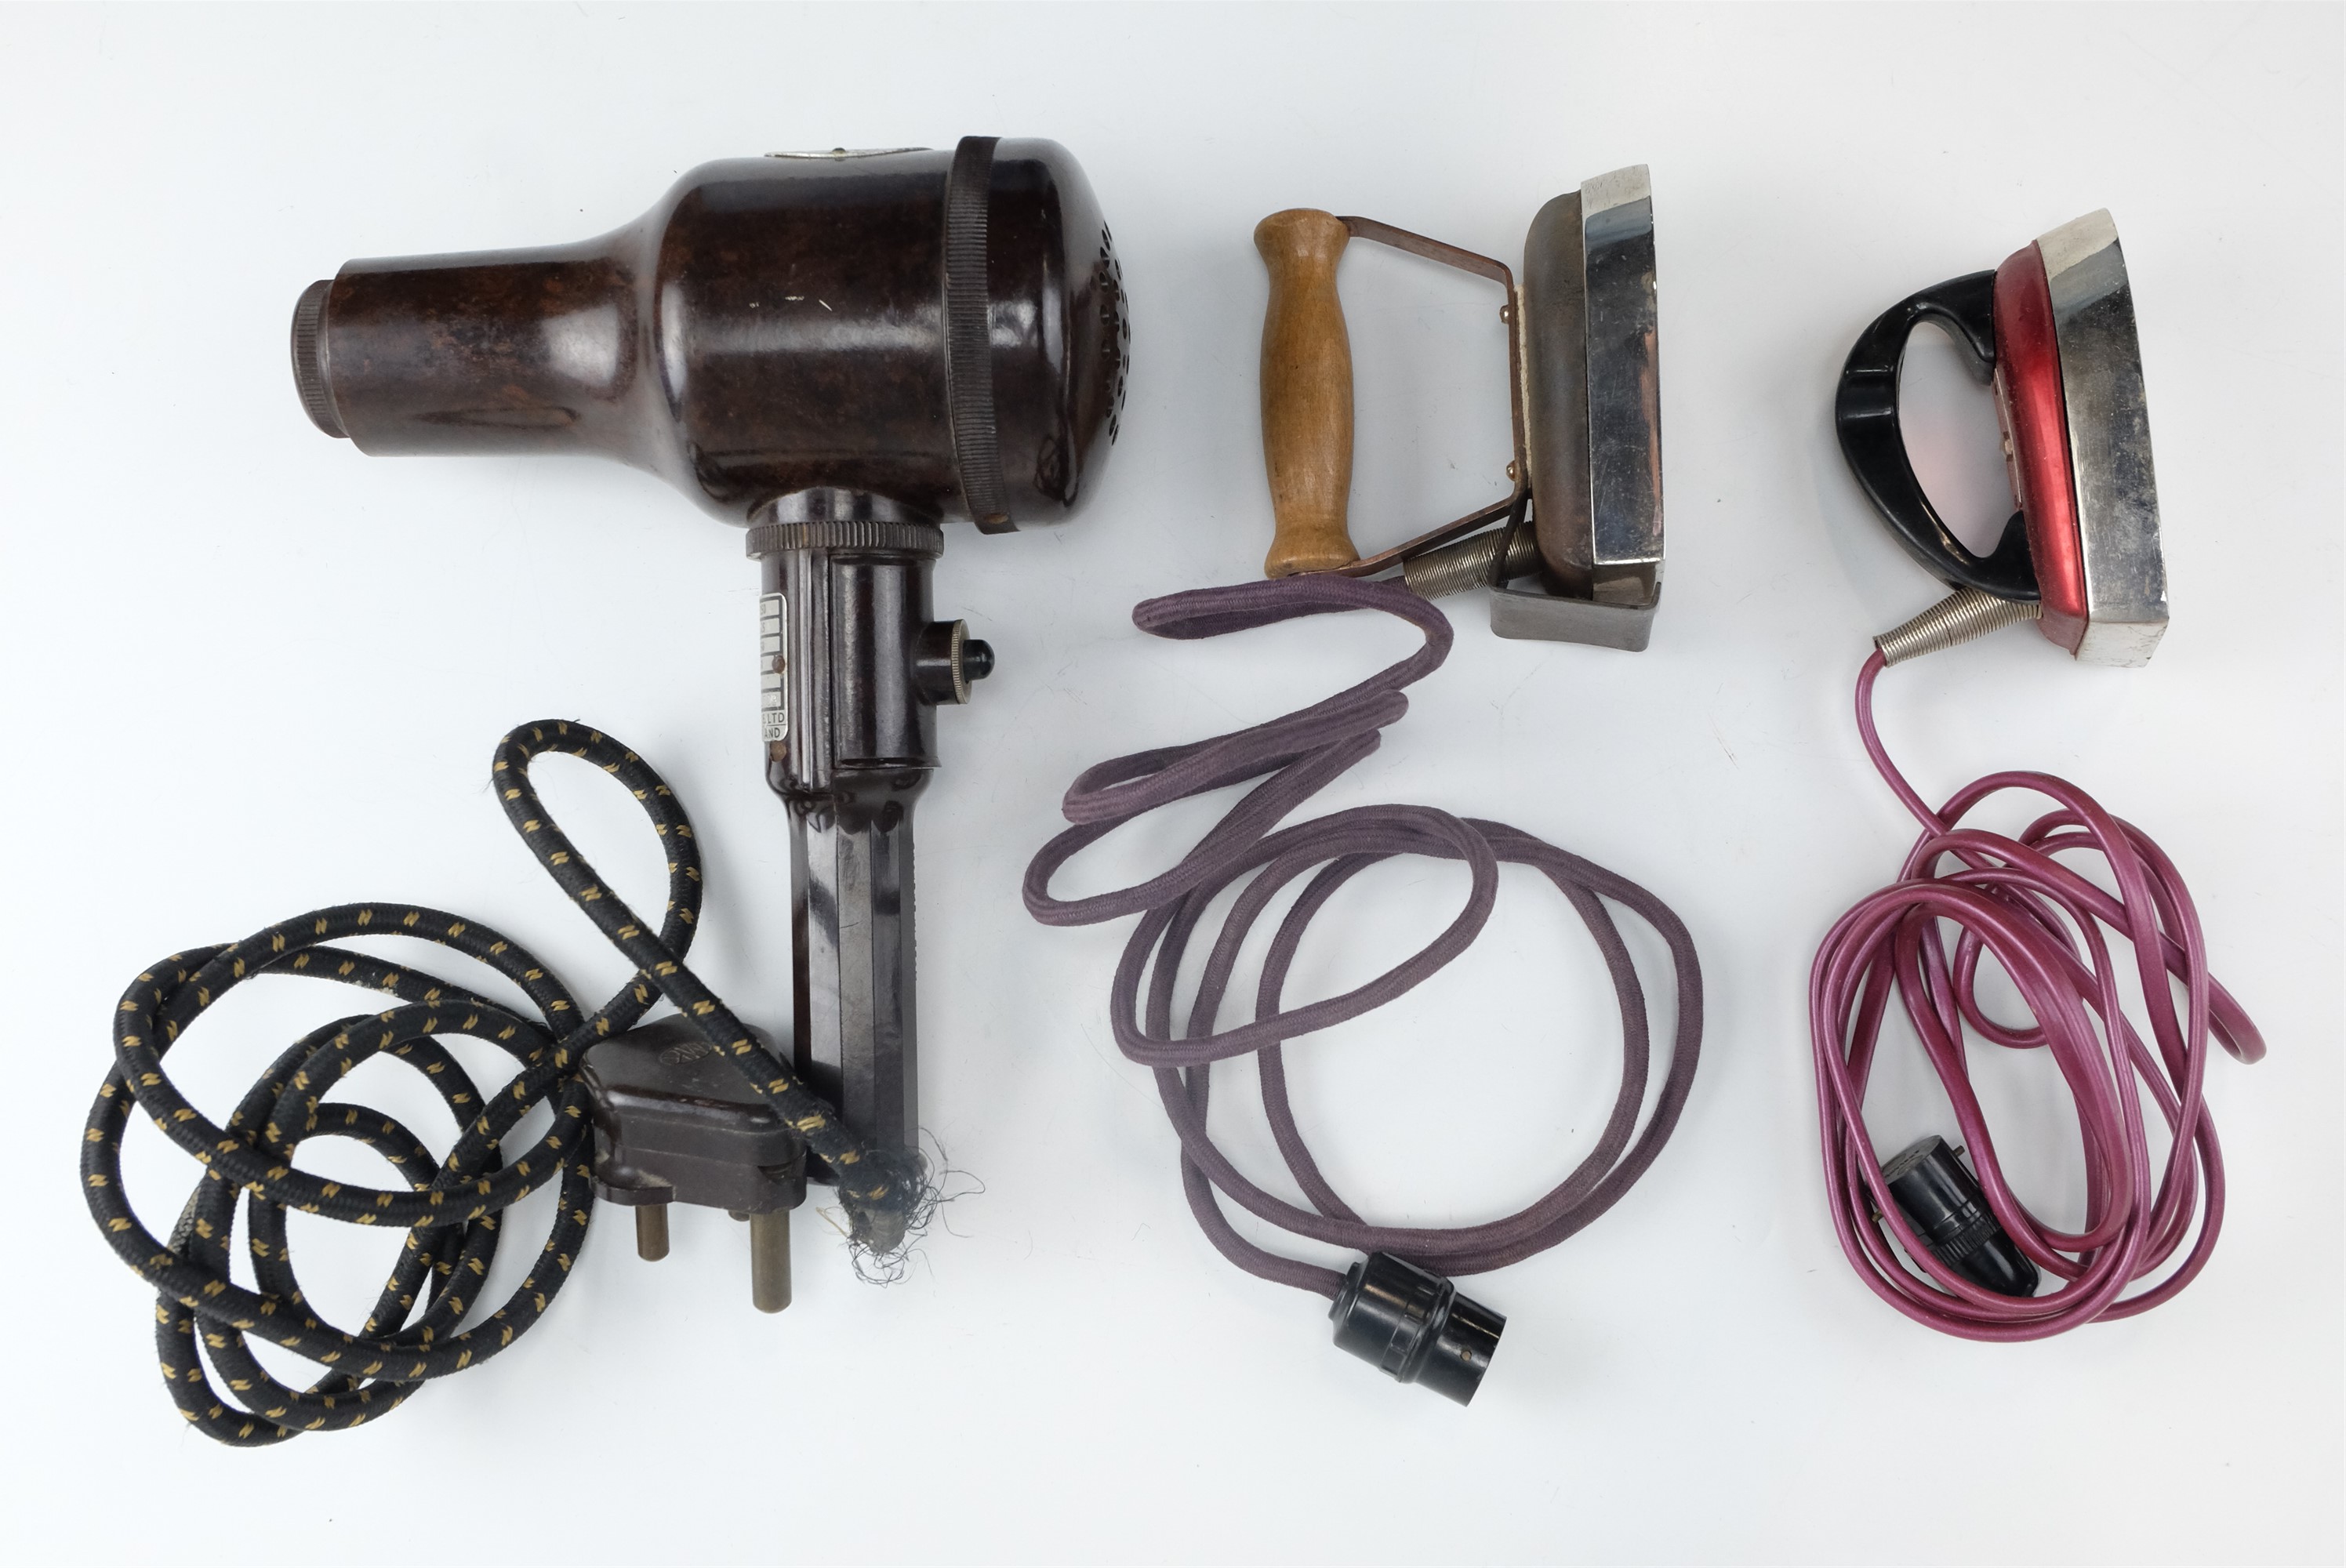 A 1930s Bylock Bakelite hairdryer together with a "Clem" travelling iron by Clayton, Lewis & - Image 2 of 2